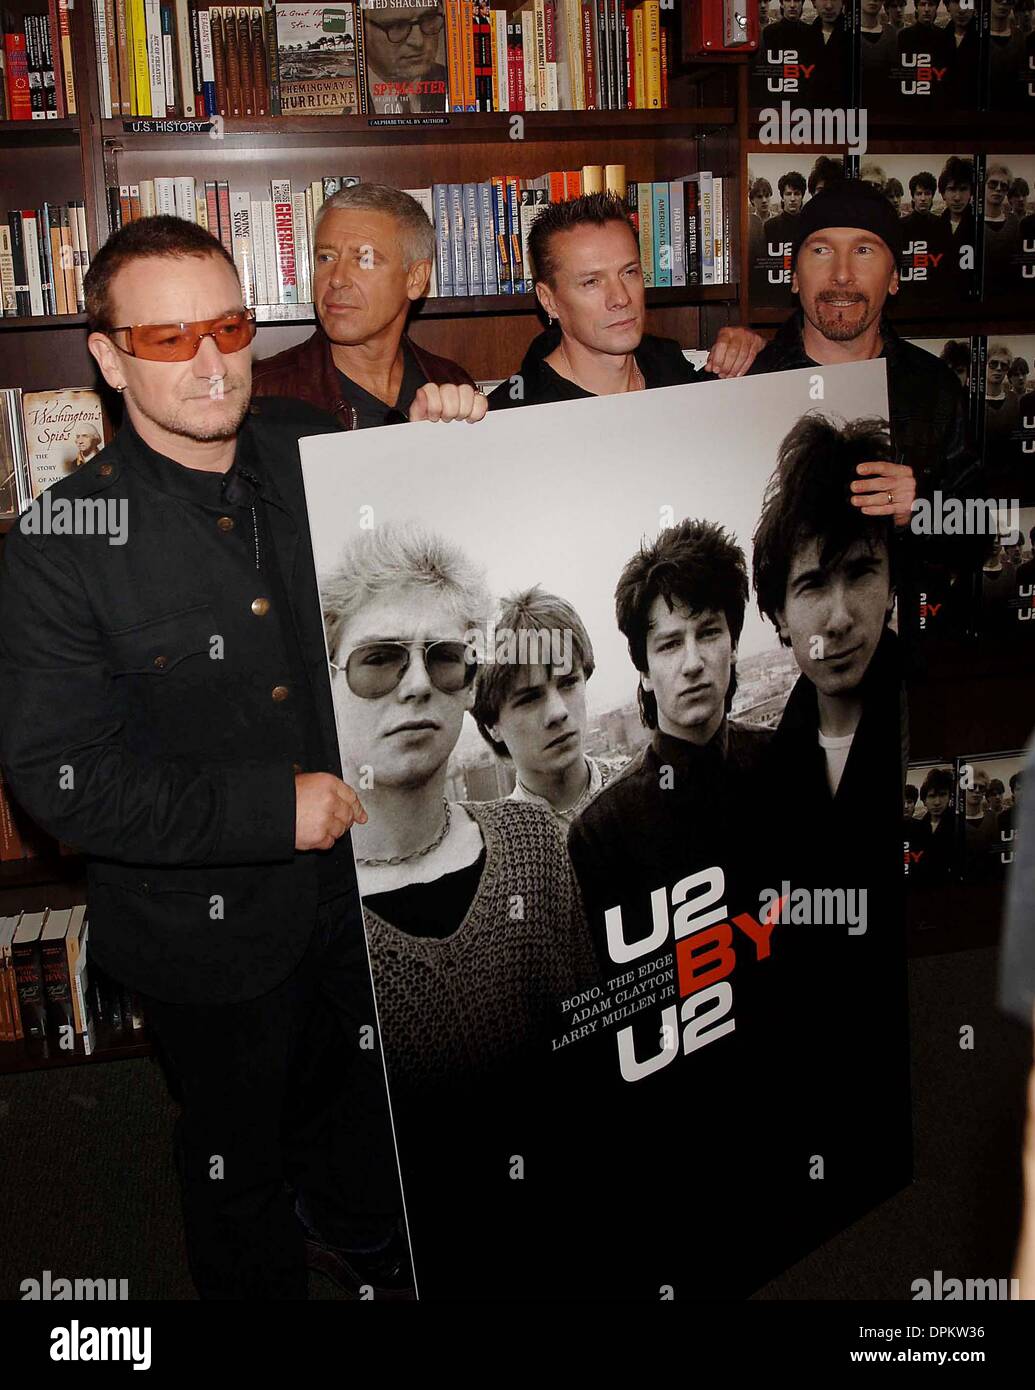 Sept. 26, 2006 - New York, New York, USA - The band U2 appears at the Barnes & Noble book store in Union Square in Manhattan  to promote their new book on U2 on September 26, 2006.. Andrea Renault     K49998AR.U2(Credit Image: © Globe Photos/ZUMAPRESS.com) Stock Photo